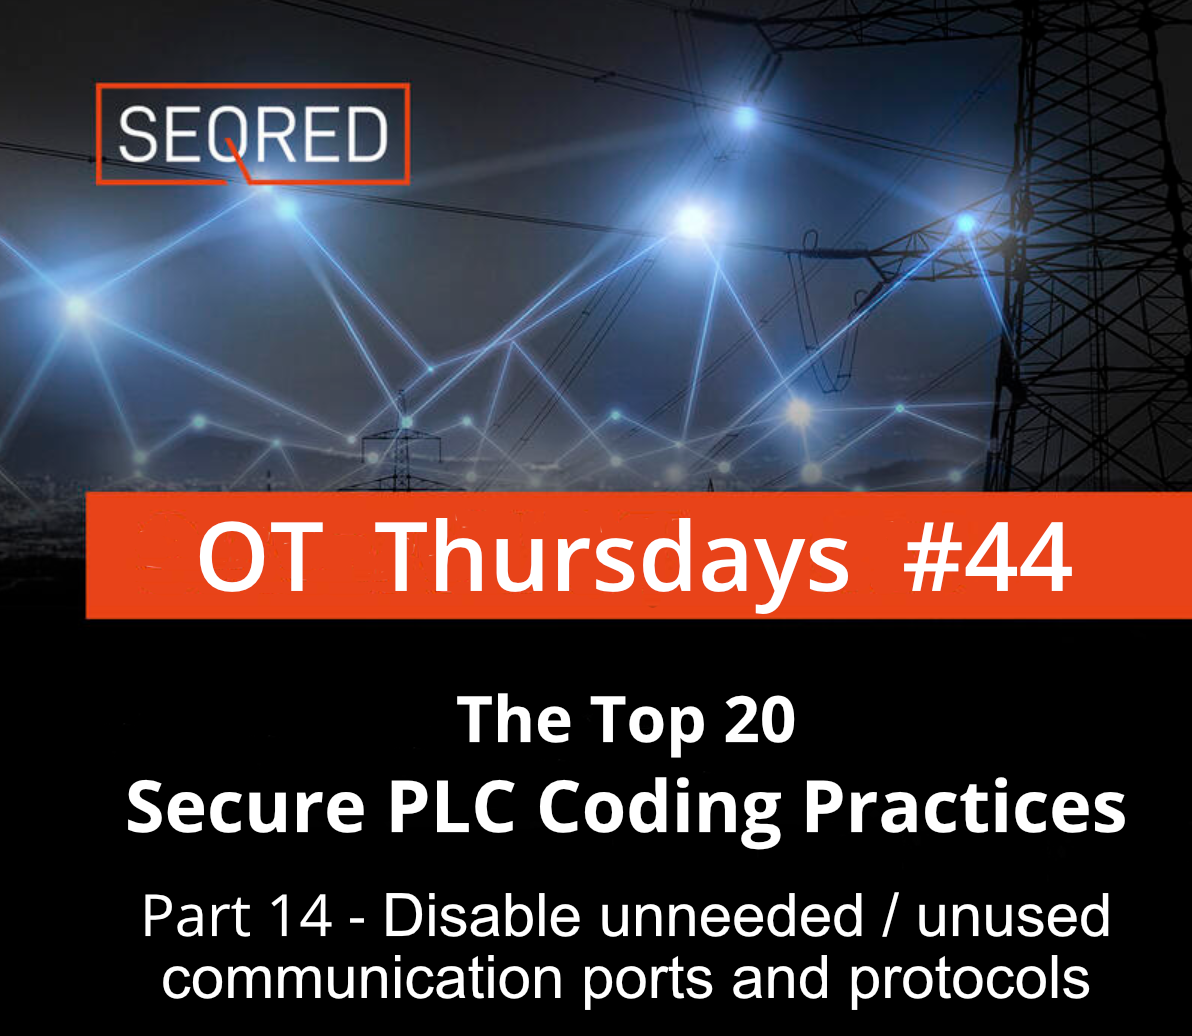 The Top 20 Secure PLC Coding Practices. Part 12 - Instrument for plausibility checks